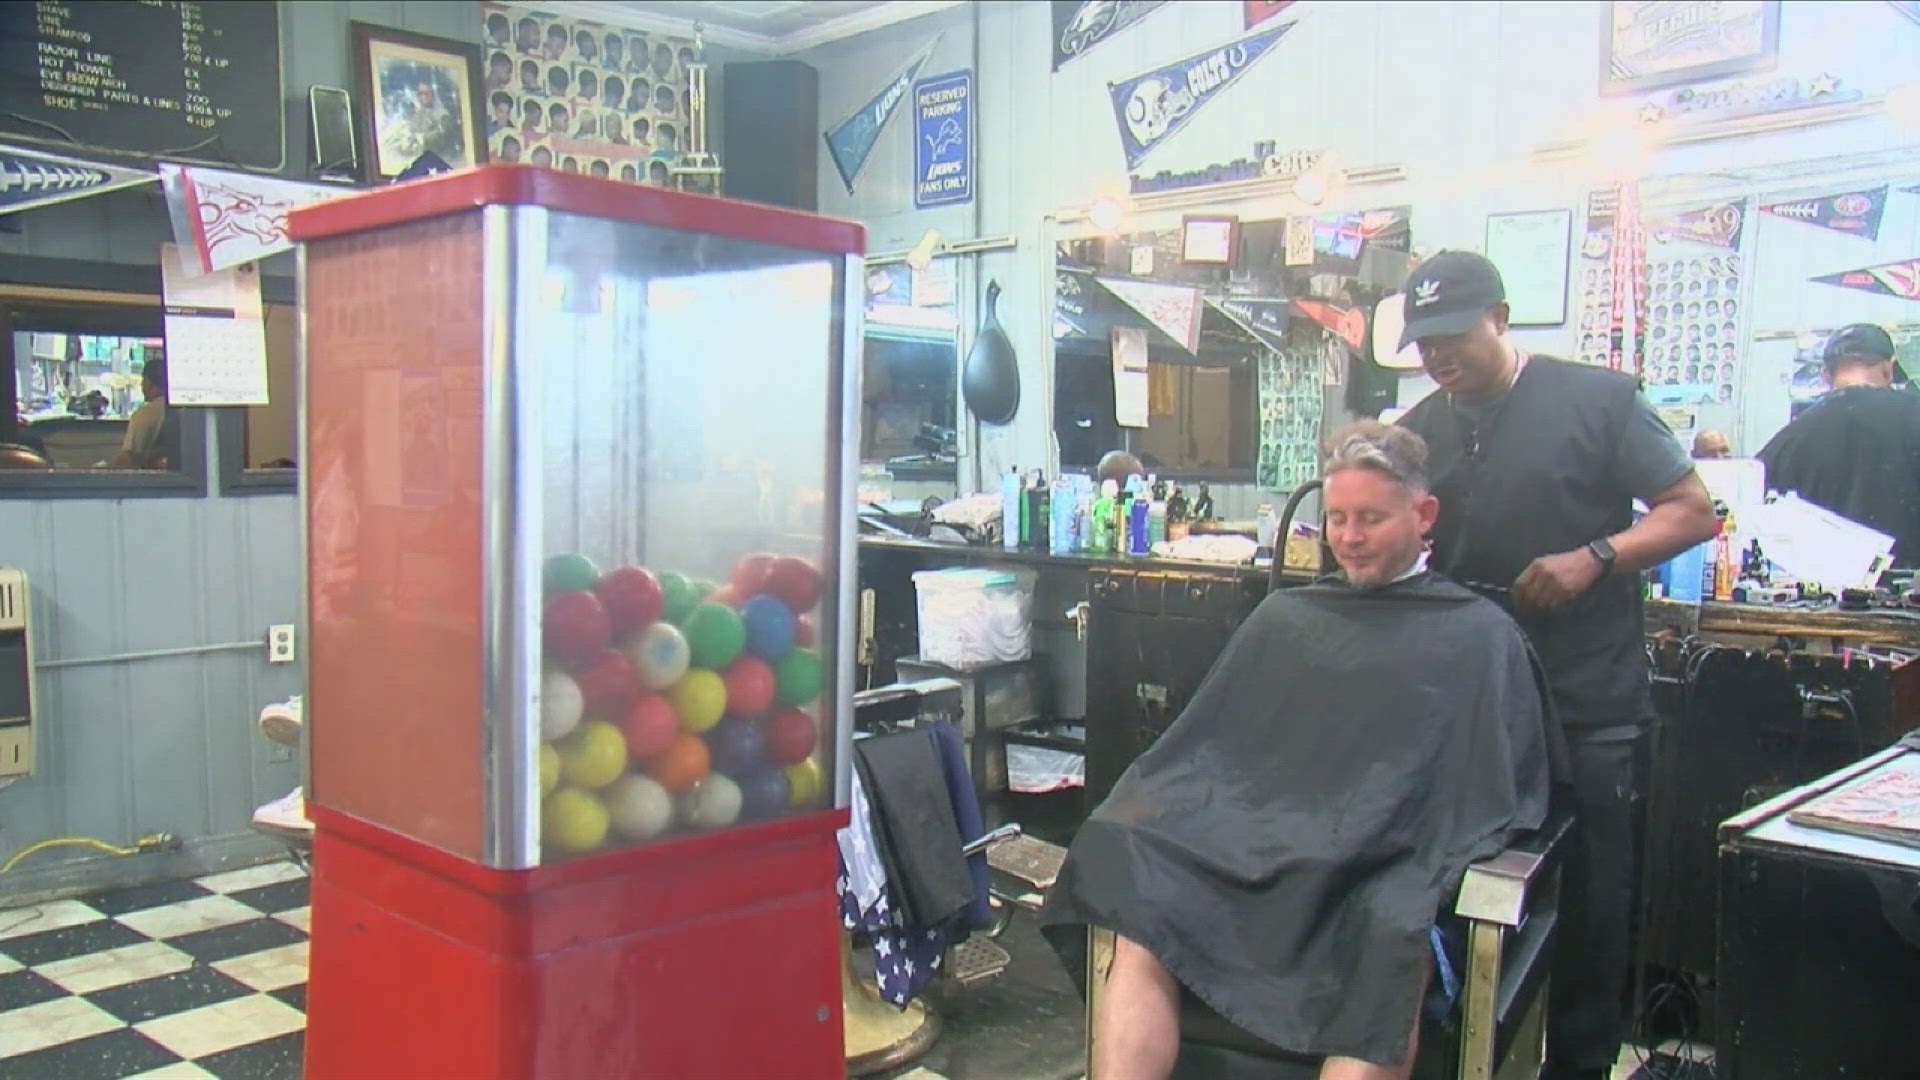 A historic barbershop in the city of Holly Springs is a place of solidarity, where cuts and conversation happen all day.